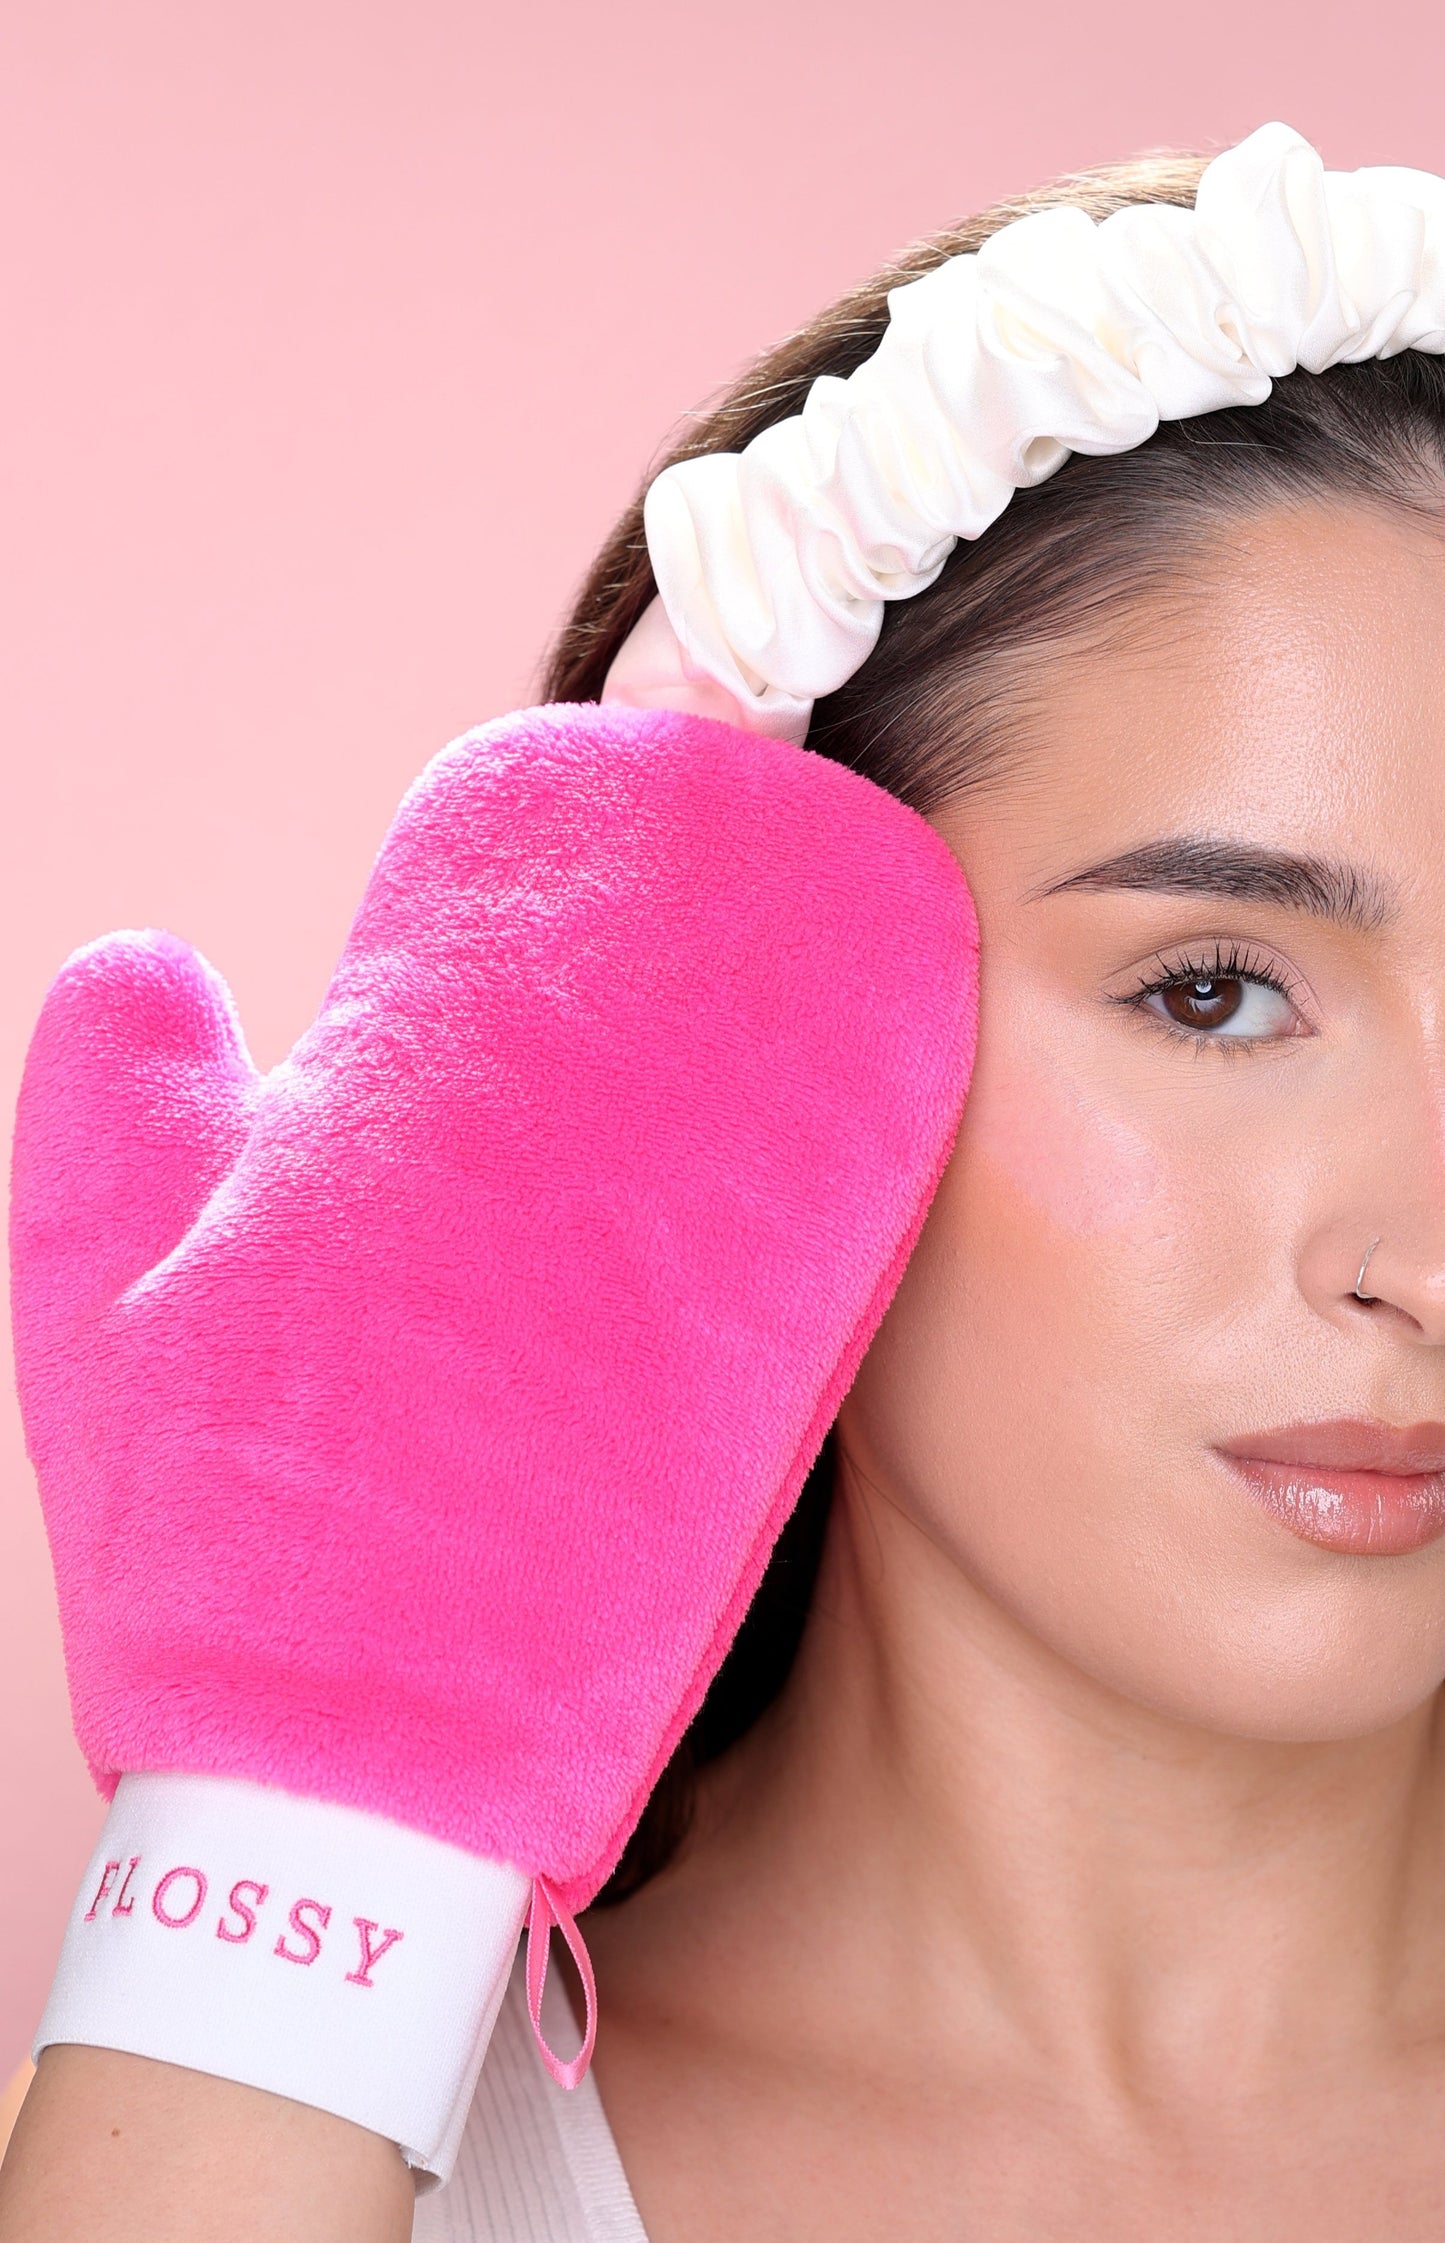 Flossy Makeup Removing Glove